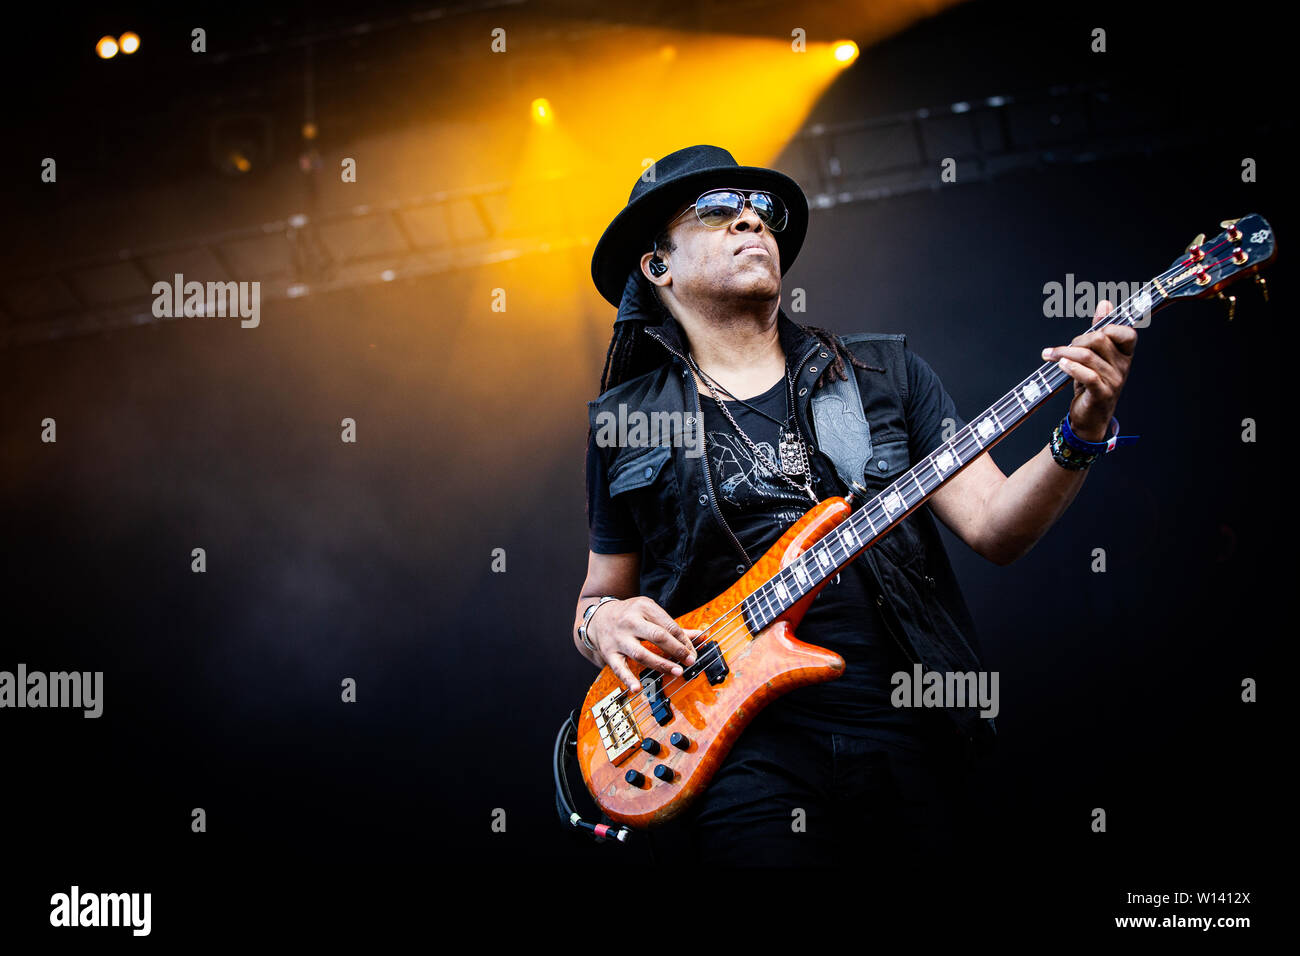 Copenhagen, Denmark - June 22nd, 2019. The American rock band Living Colour performs a live concert during the Danish heavy metal festival Copenhell 2019 in Copenhagen. Here bass player Doug Wimbish is seen live on stage. (Photo credit: Gonzales Photo - Christian Hjorth). Stock Photo